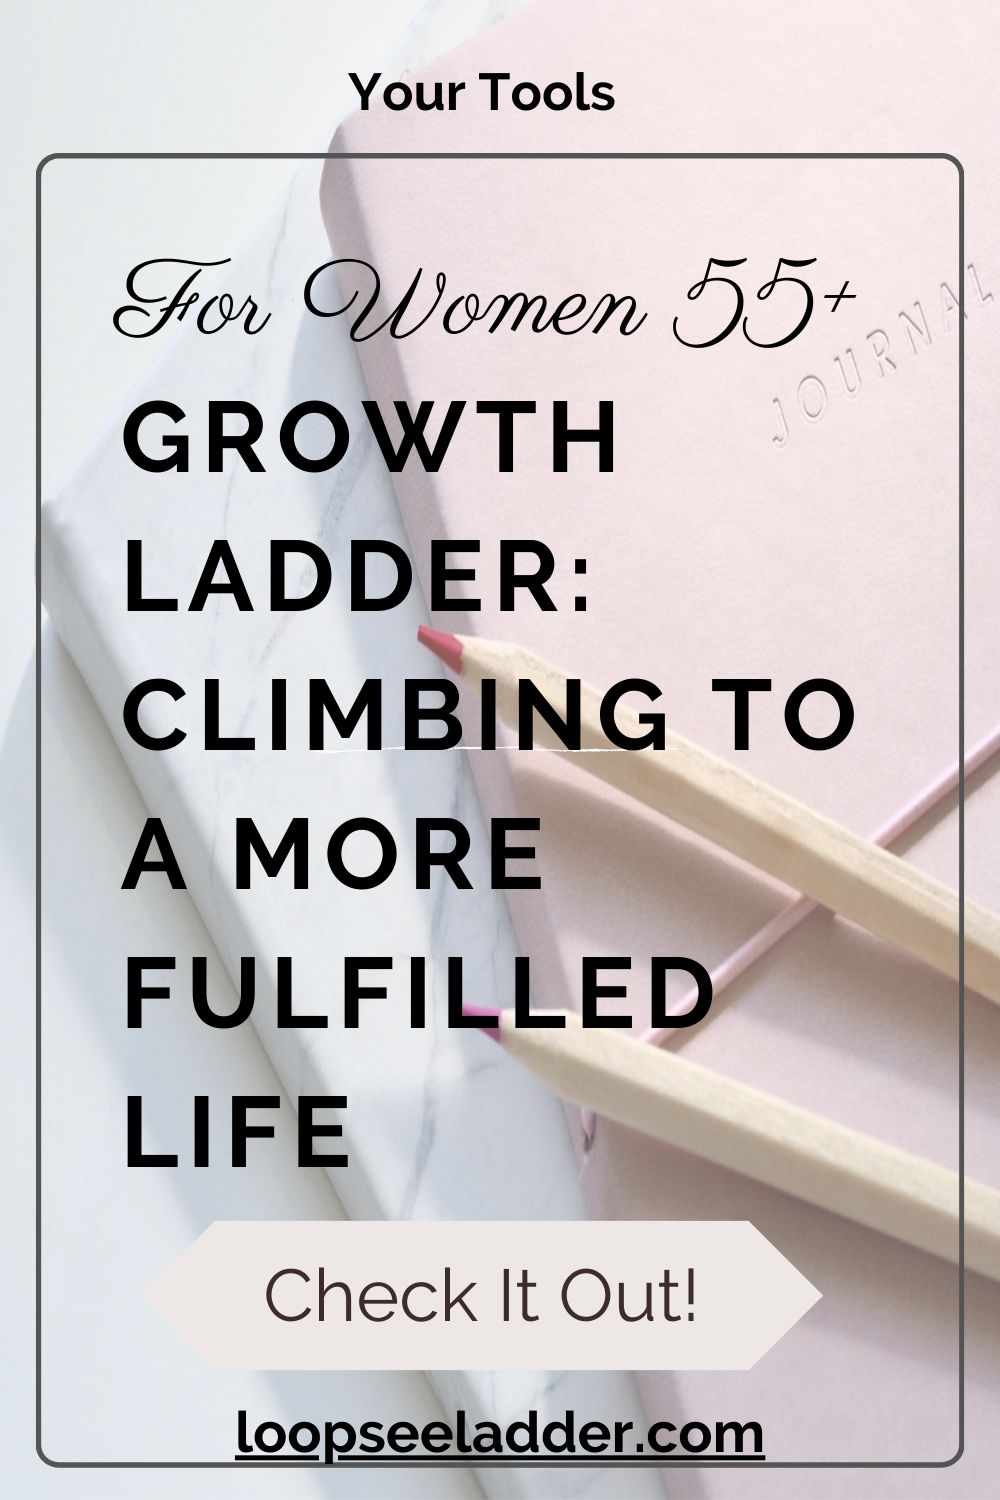 The Growth Ladder: Climbing to a More Fulfilled Life After 55